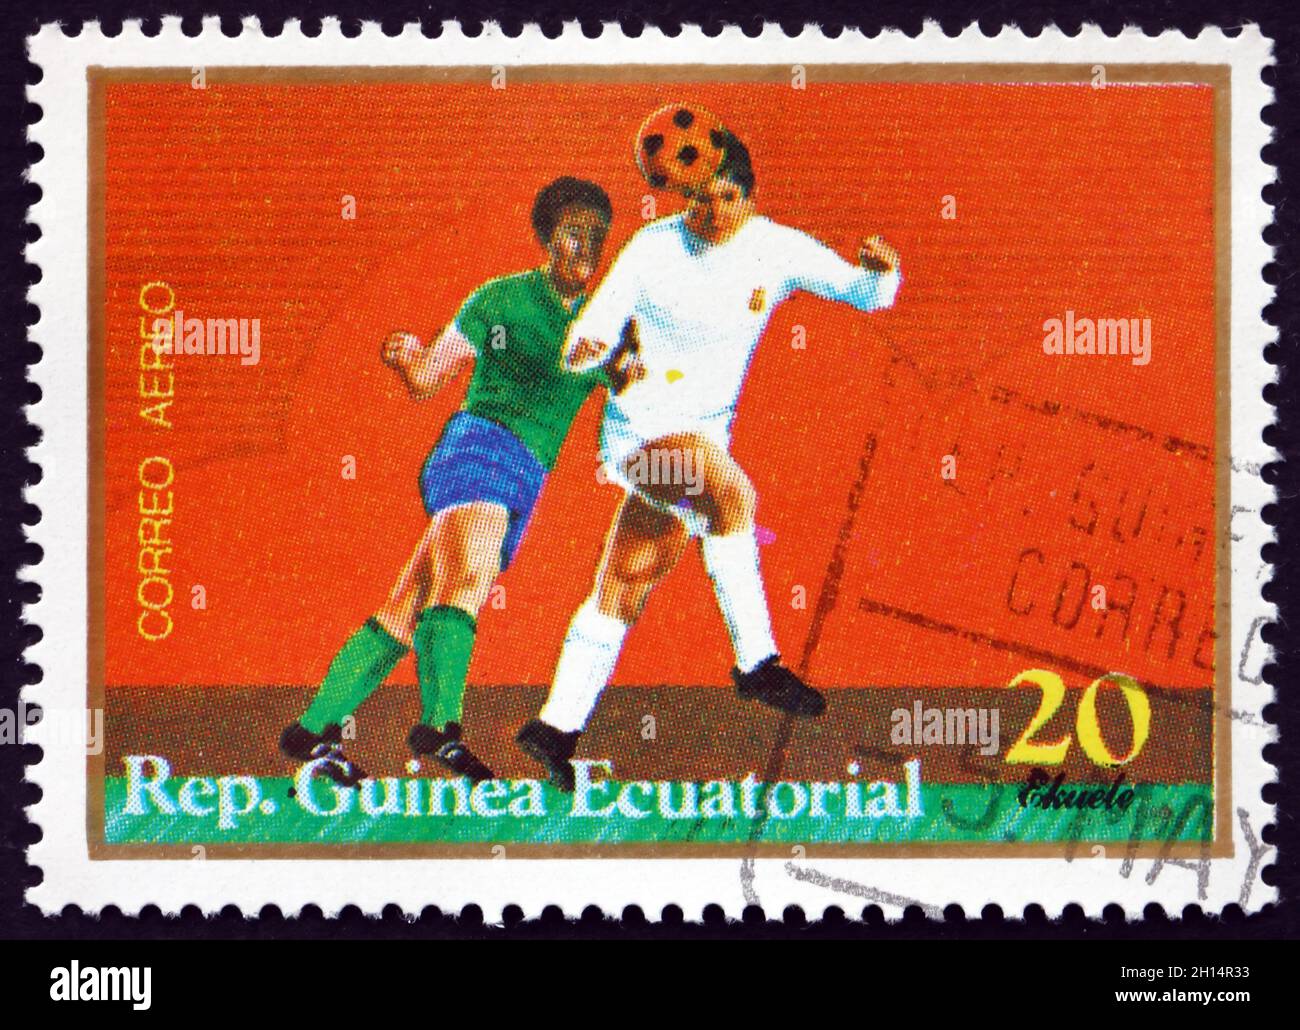 EQUATORIAL GUINEA - CIRCA 1977: a stamp printed in Equatorial Guinea shows Players in Action, Soccer, circa 1977 Stock Photo